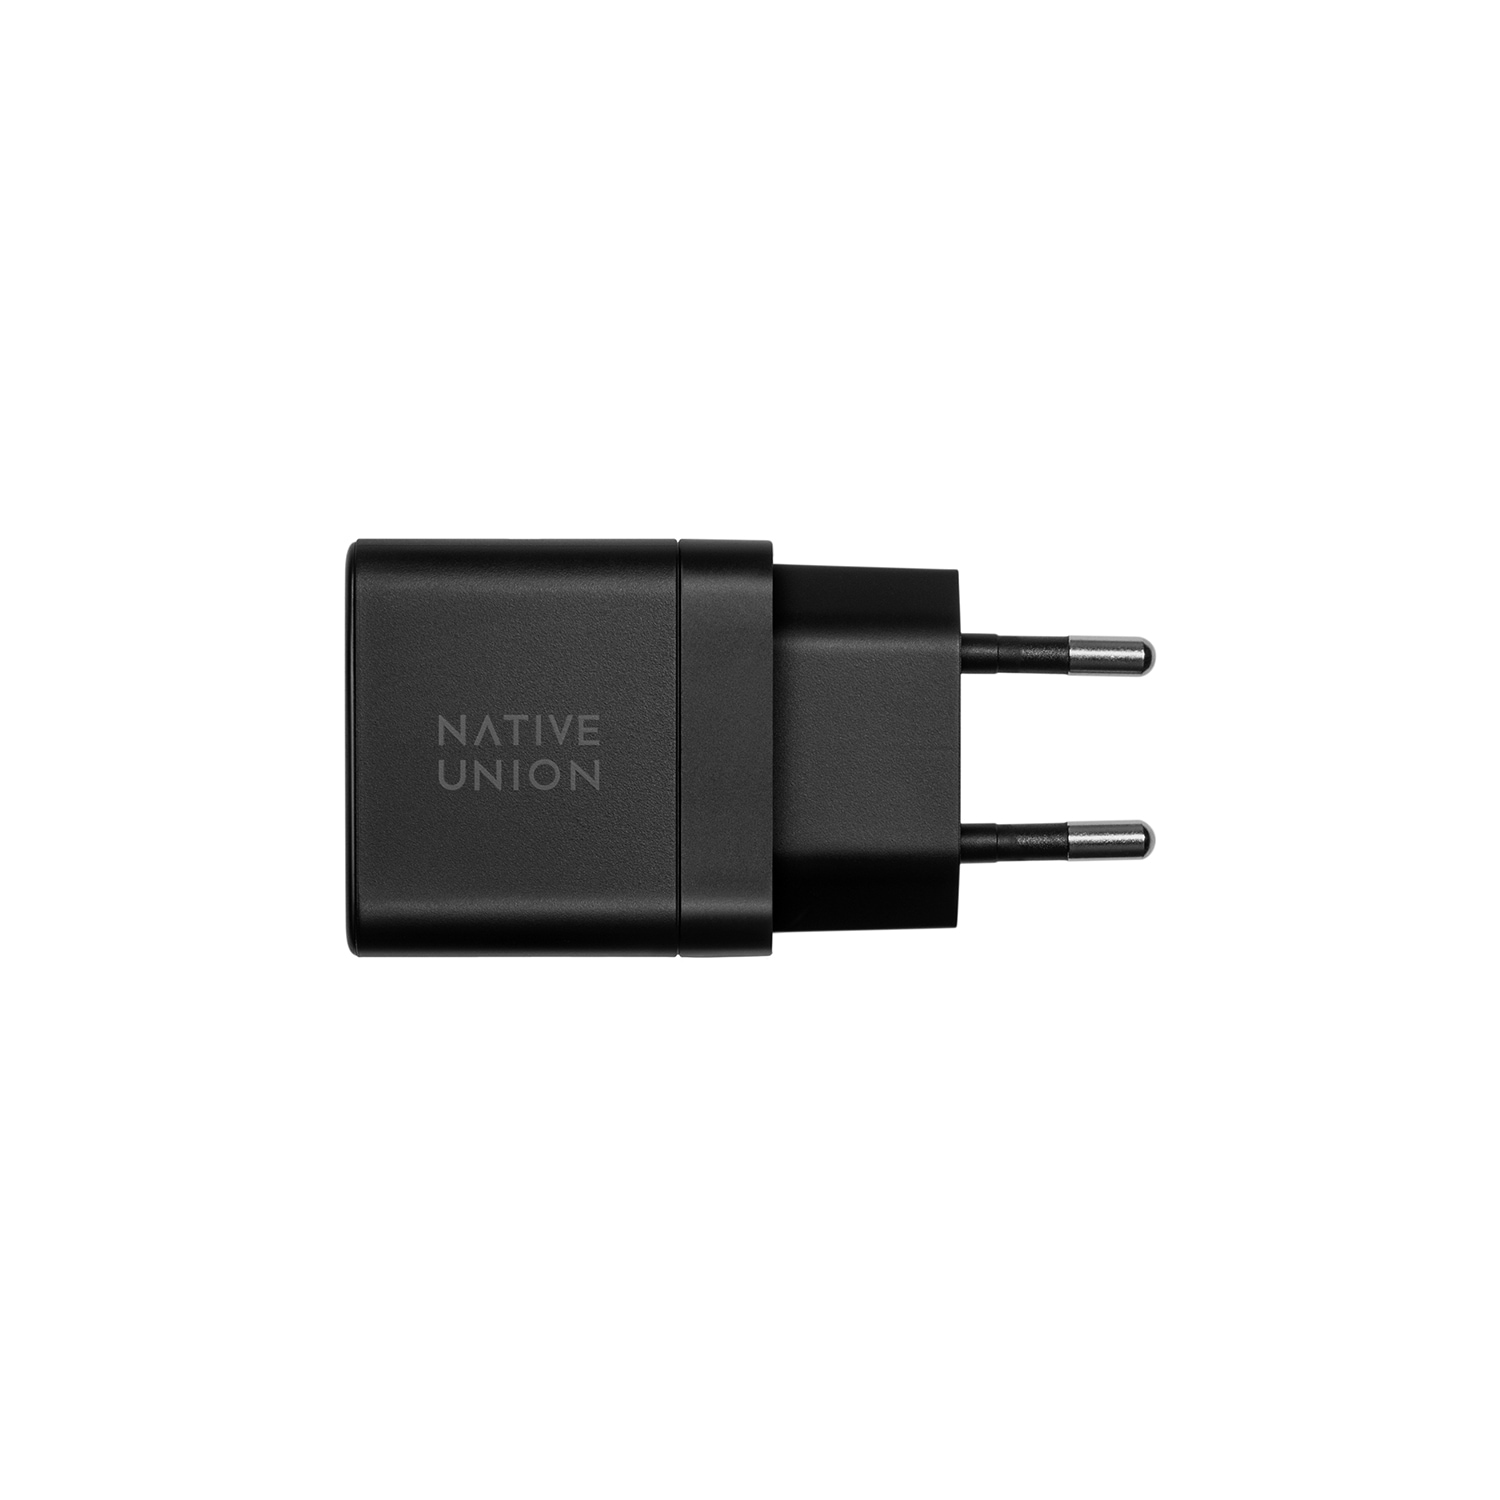 NATIVE UNION Ladestation »Fast GaN Charger PD 35W«